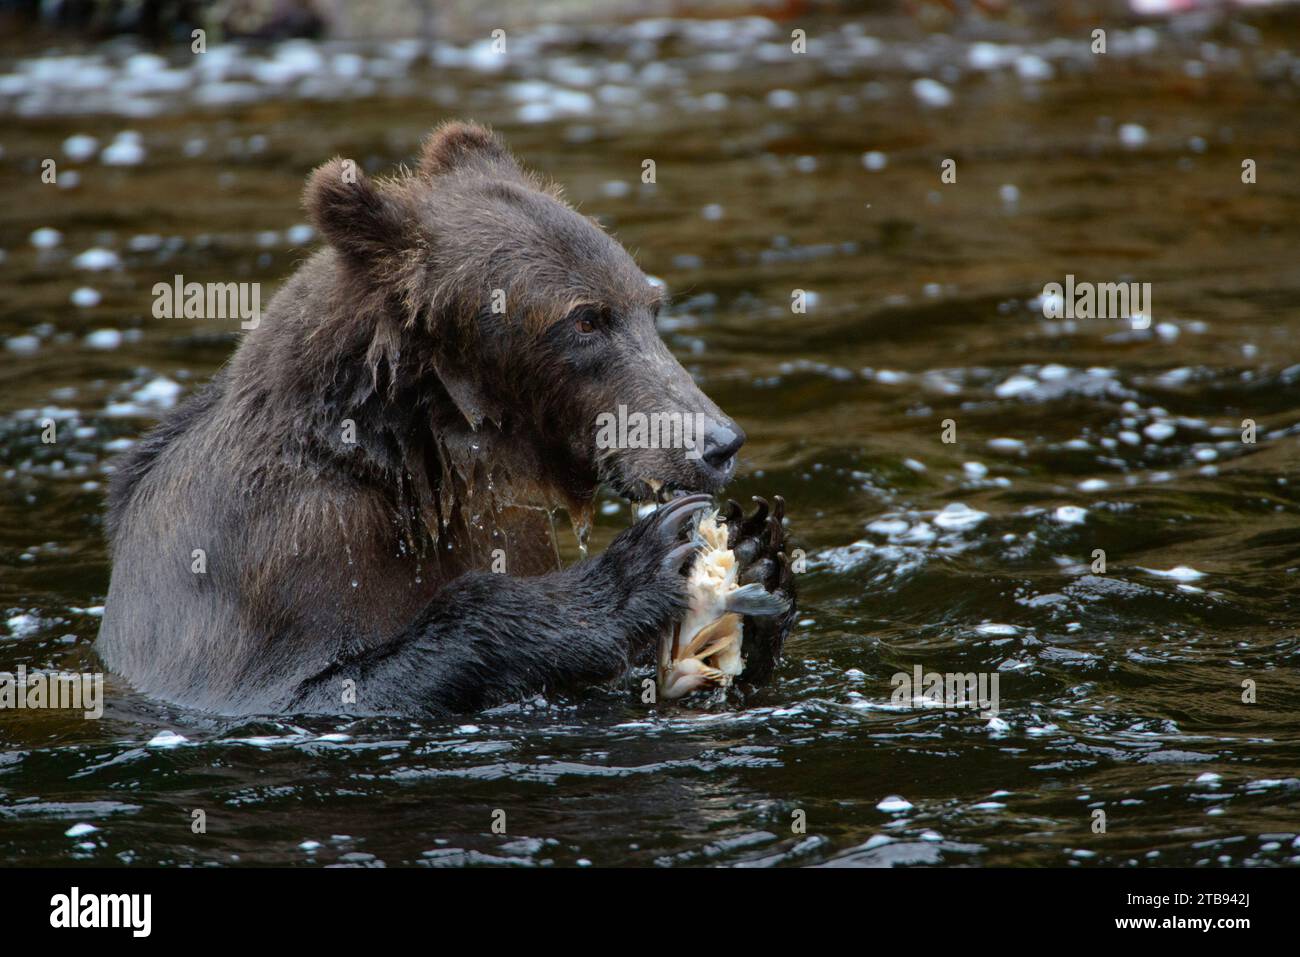 Portrait of a Brown bear (Ursus arctos gyas) eating sockeye salmon in the waters of Inside Passage, Alaska, USA; Alaska, United States of America Stock Photo